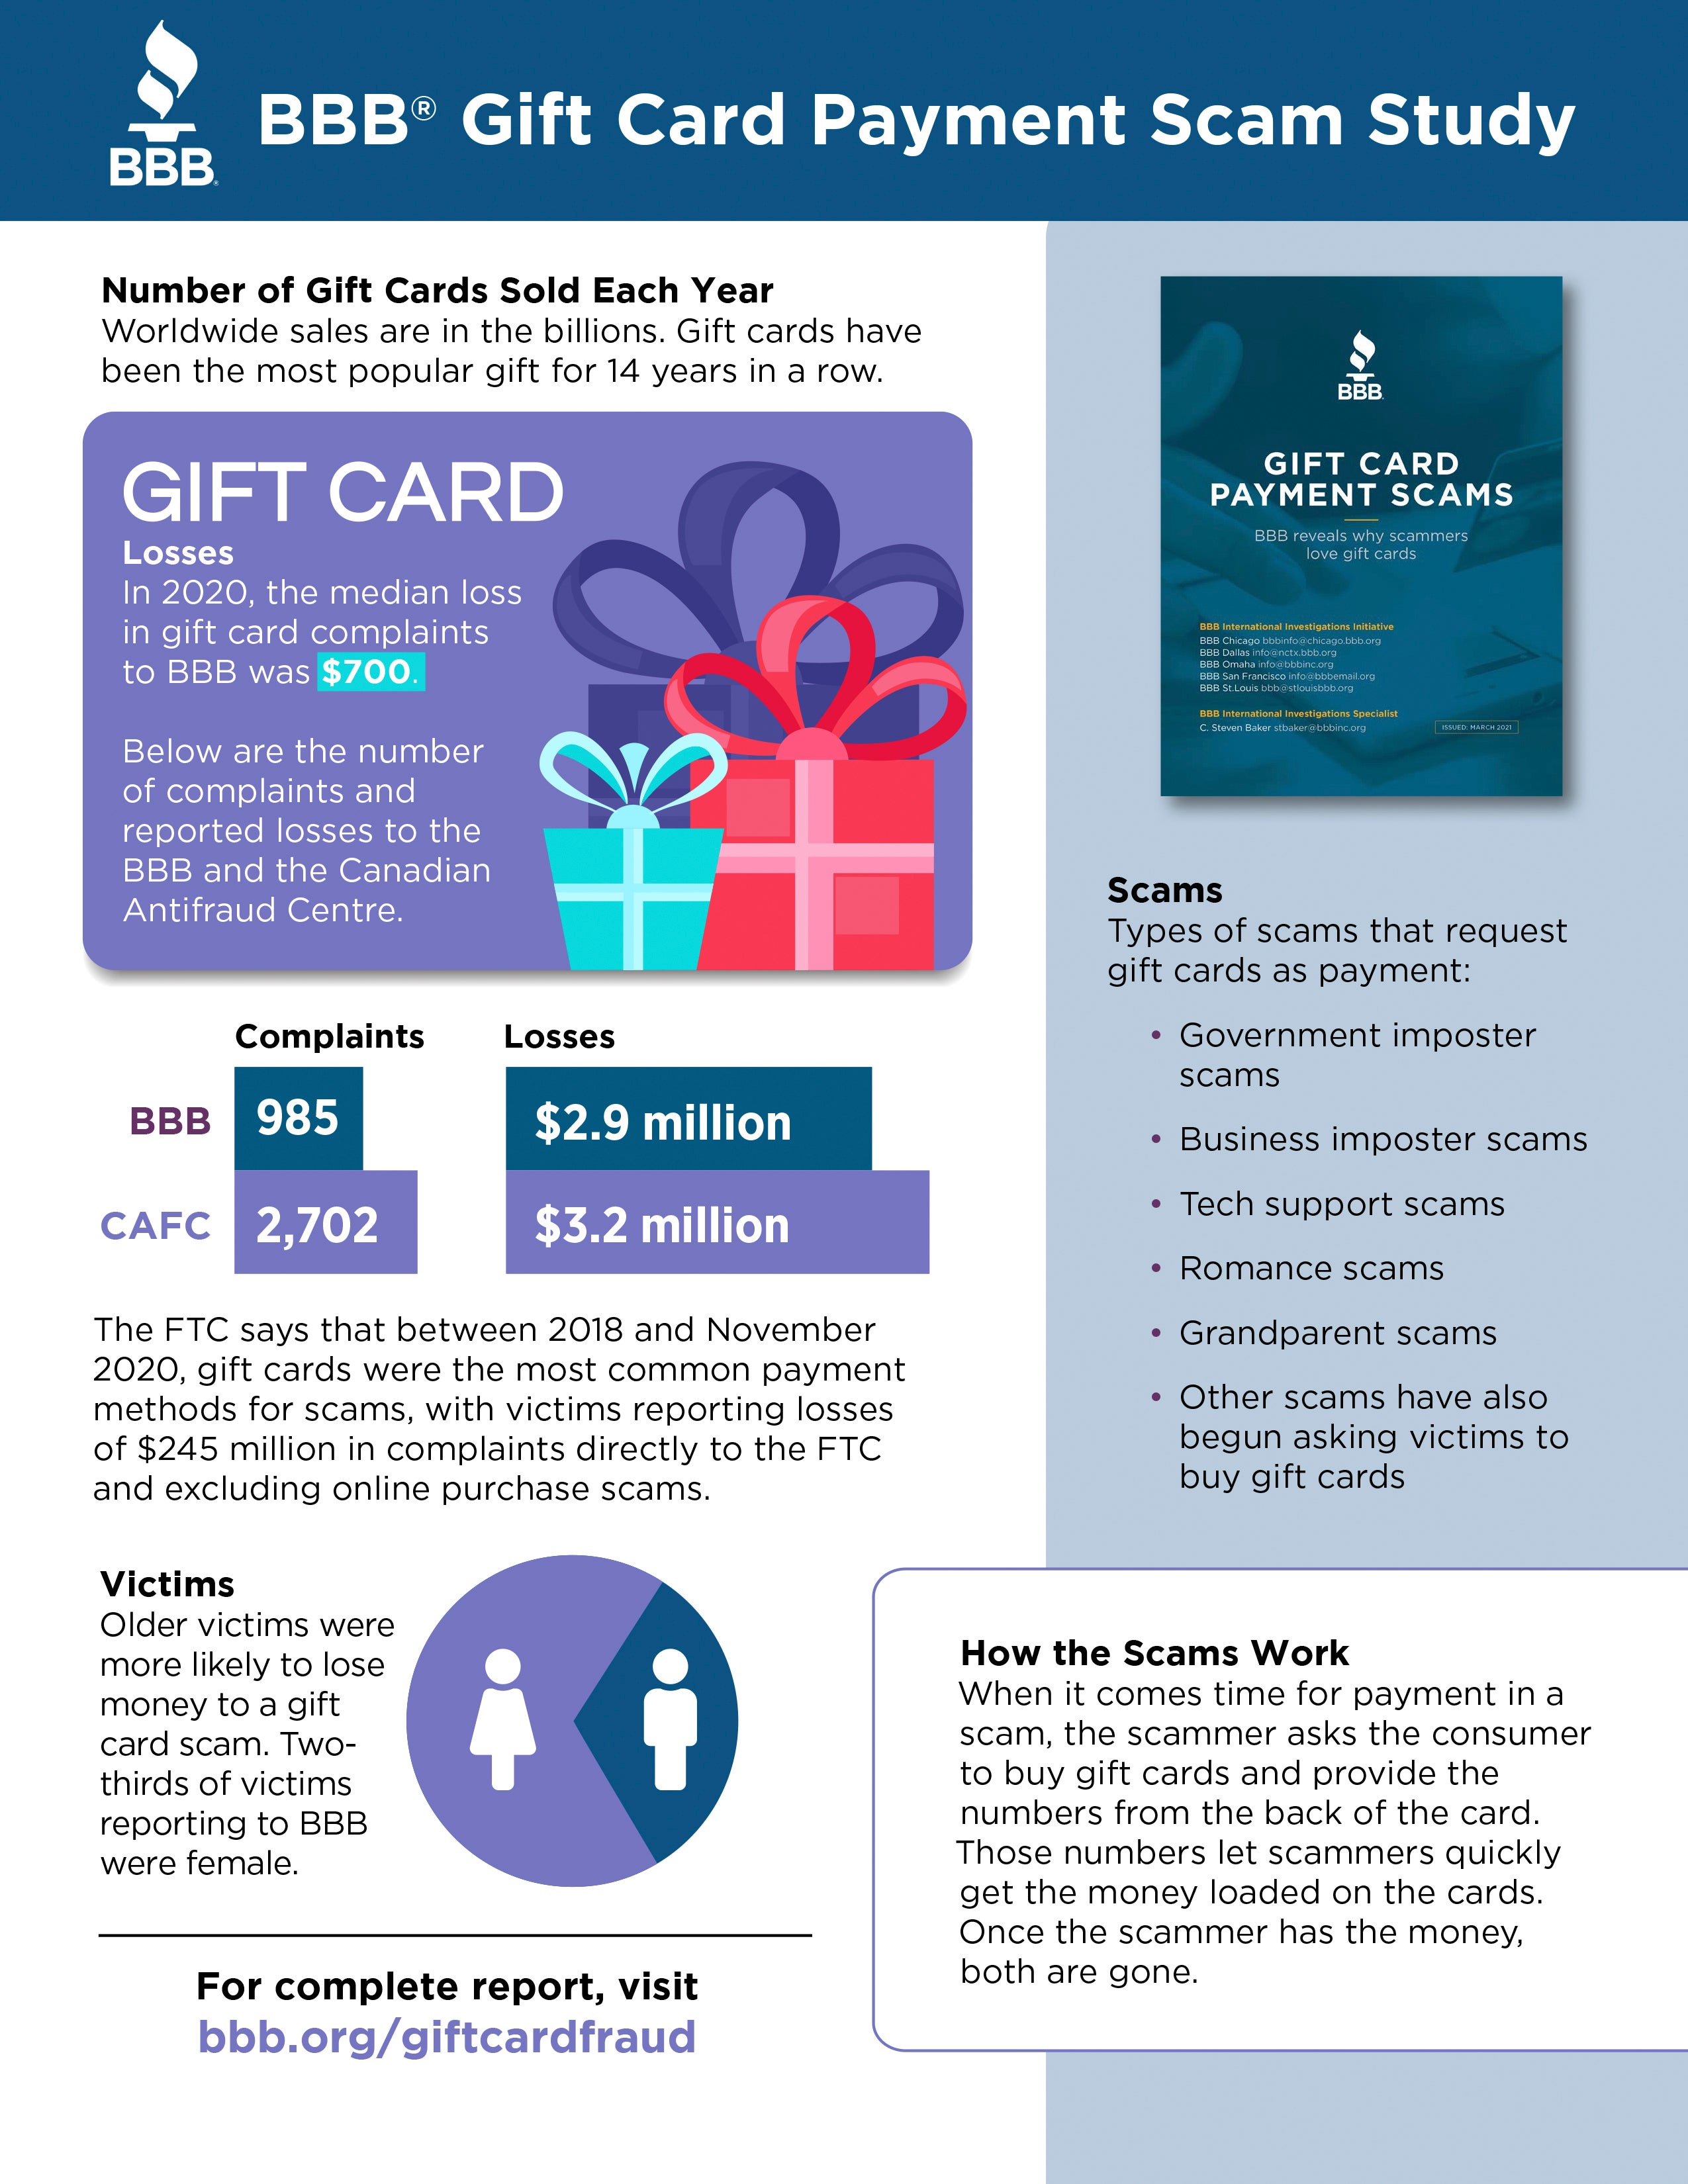 What Are Gift Card Scams?